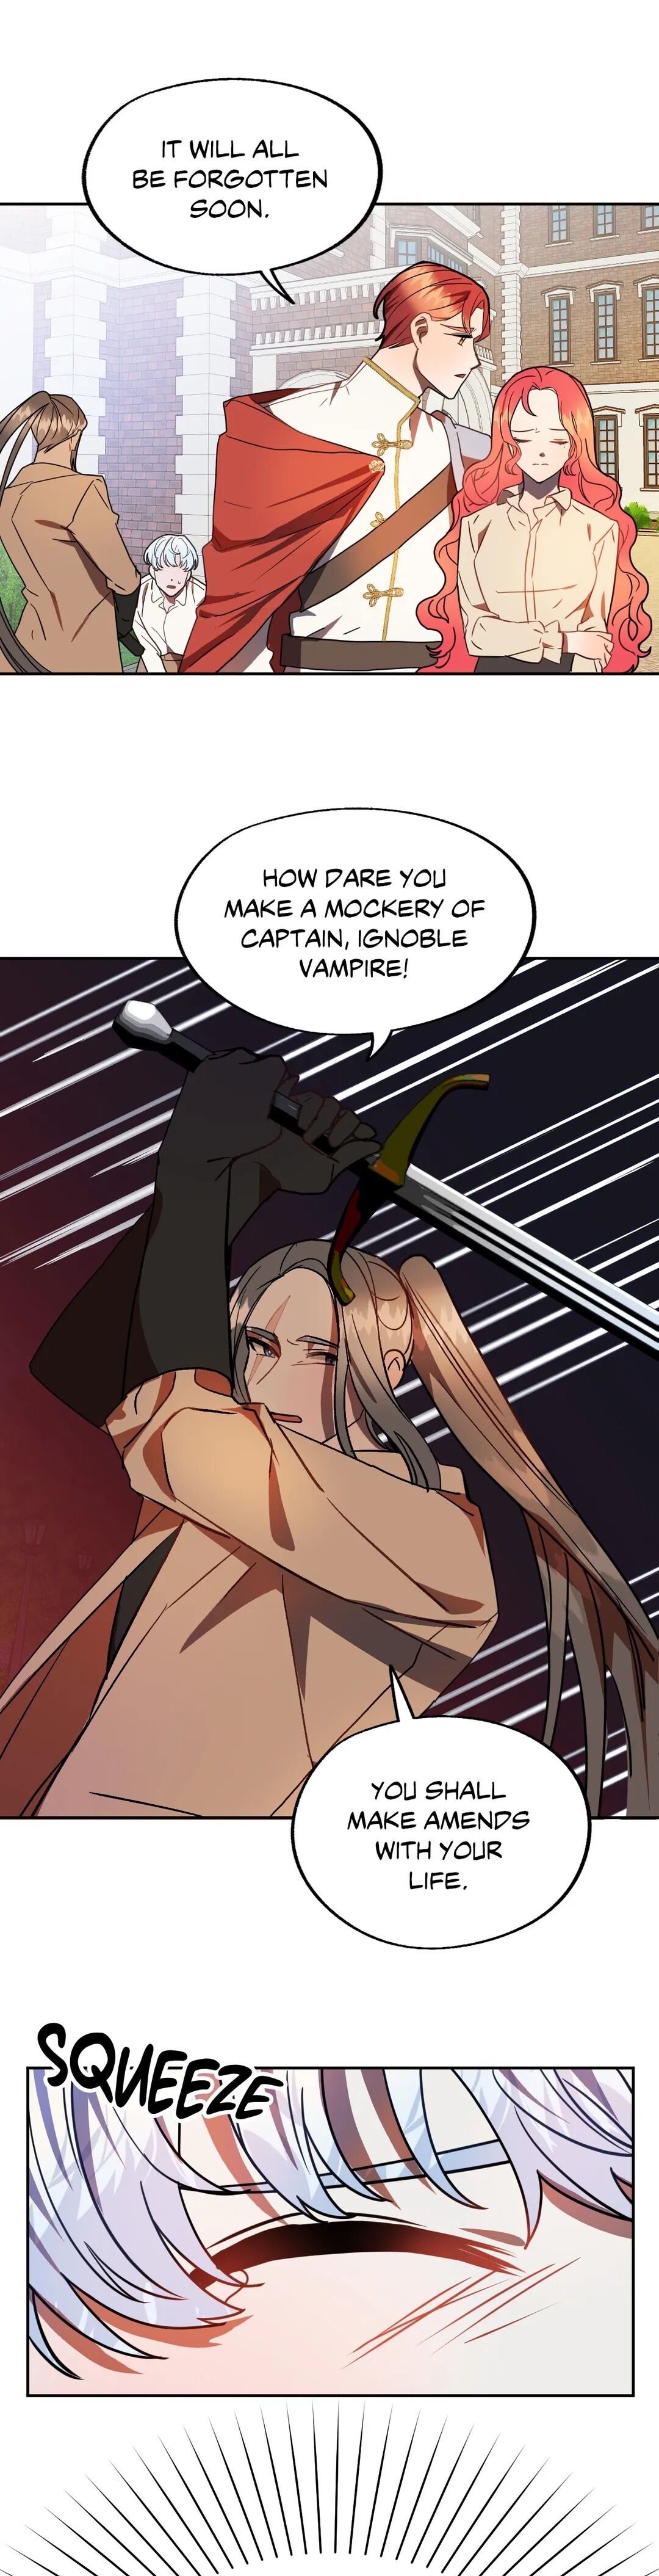 My Fiancée Is A Vampire Hunter! - Page 1